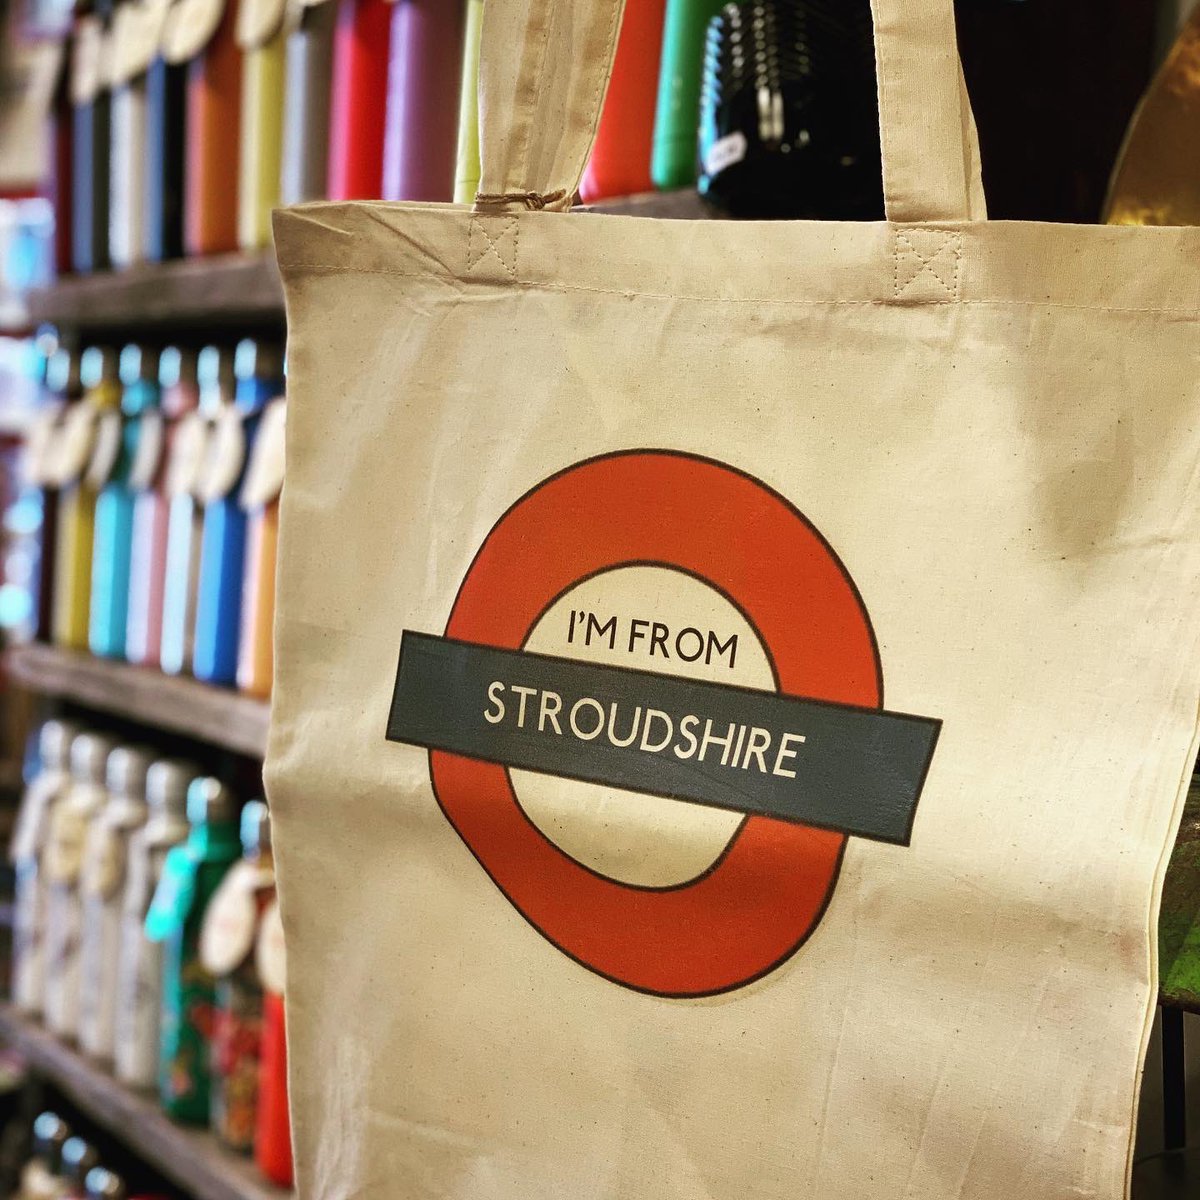 We certainly are Proud to be Stroud and thought we would spread the love with these tote bags. Ditch the plastic guys and shop in style!
#shopindependent #shoplocal #shopsmall #totebag #reusable #nomoreplastic #plasticfreelife #bagforlife #shopping #homewares #shoplocal #Stroud